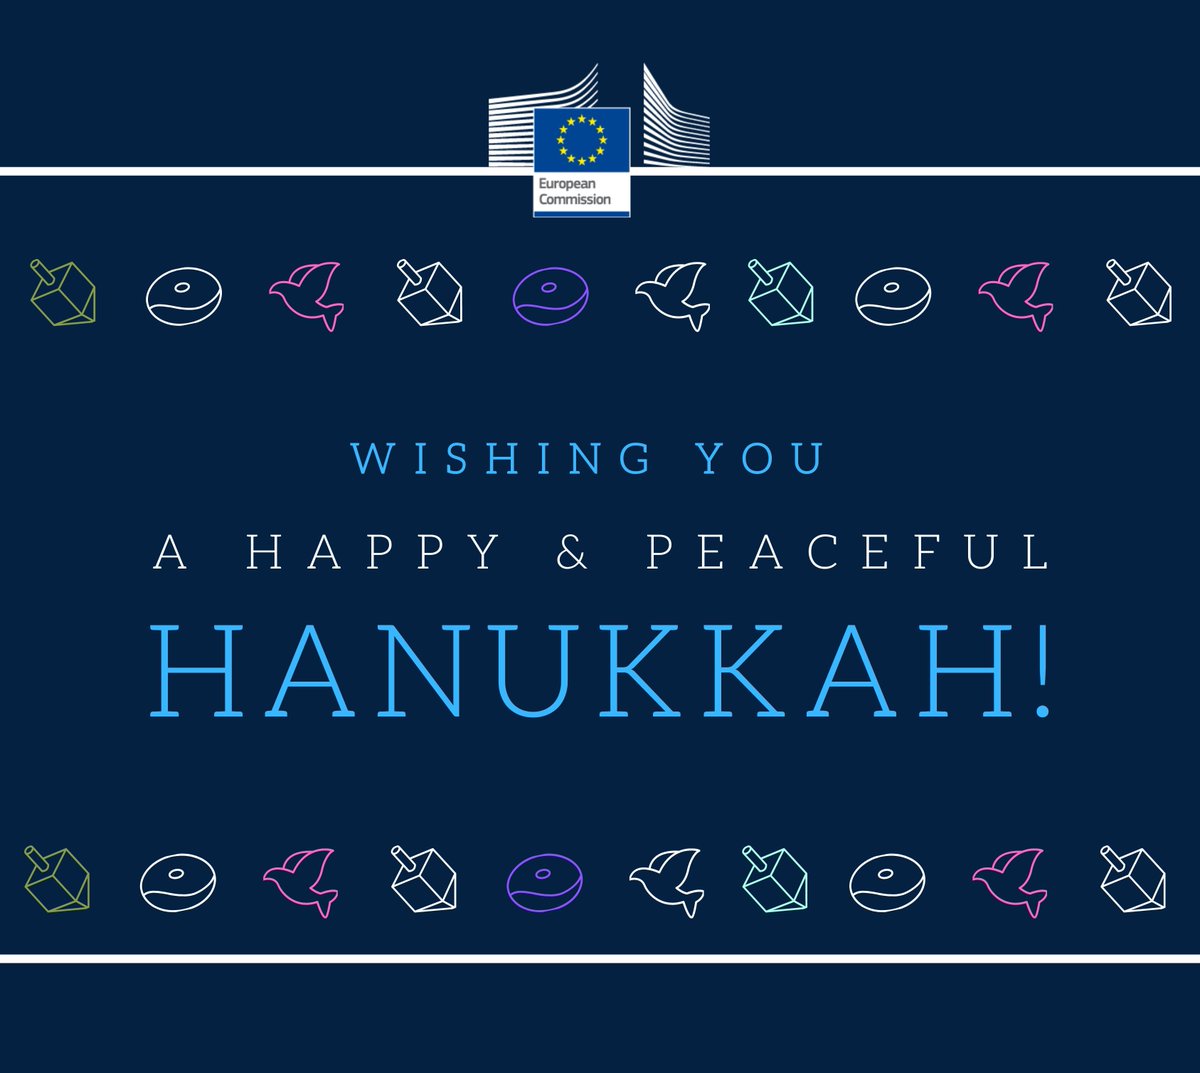 Wishing all Jewish friends and their families a peaceful, joyous and happy #Hannukah!

In these difficult times, let’s choose light and remind us all that light drives out darkness and creates unity.

#EU4JewishLife   #No2Antisemitism